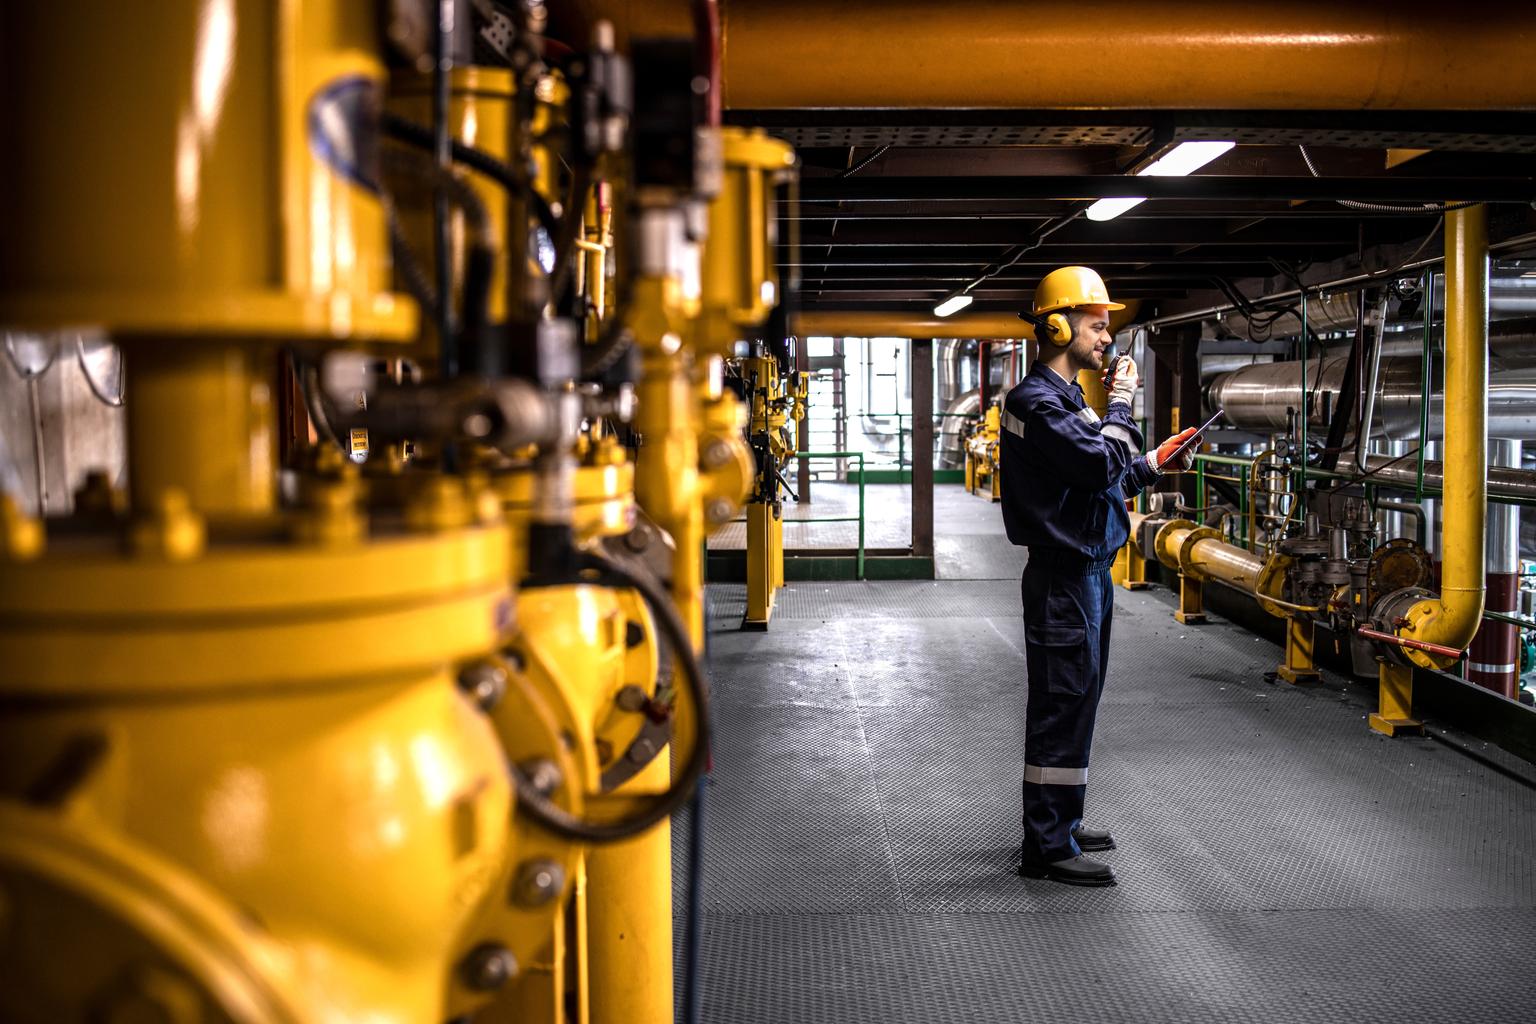 Petrochemical worker controlling process of crude oil production inside oil and gas refinery plant.